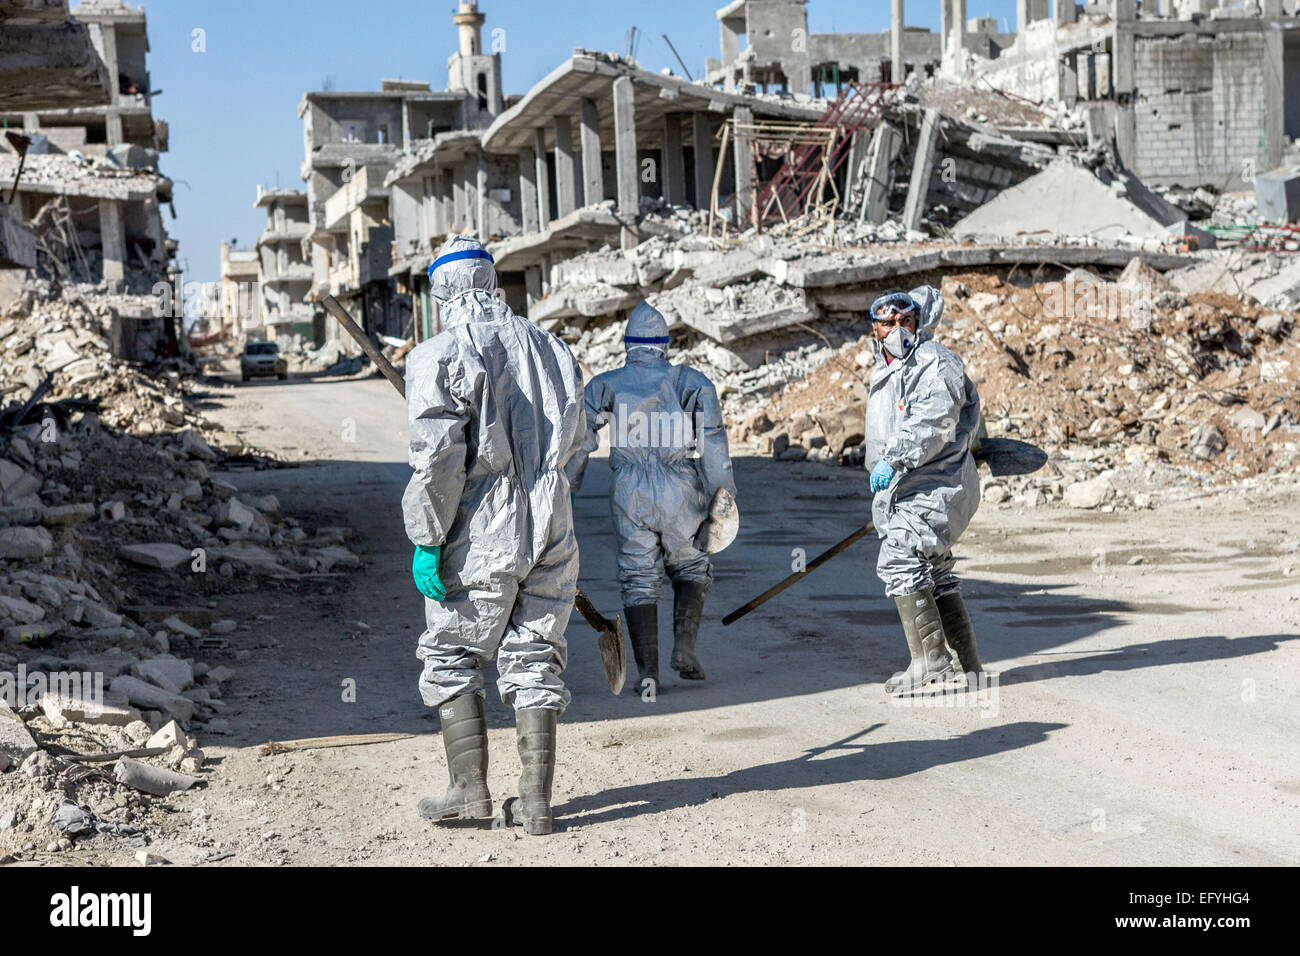 Kobane, Syria. 6th Feb, 2015. A unit of Kurdish YPG fighters wear protective suits as they search the streets for dead bodies and corpses in the ruins of Kobane, Syria, 6 February 2015. The recent fighting between Kurdish fighters and fighters of the so-called Islamic State (IS) has left vast areas of the city of Kobane in ruins. Photo: Sebastian Backhaus/dpa - NO WIRE SERVICE -/dpa/Alamy Live News Stock Photo